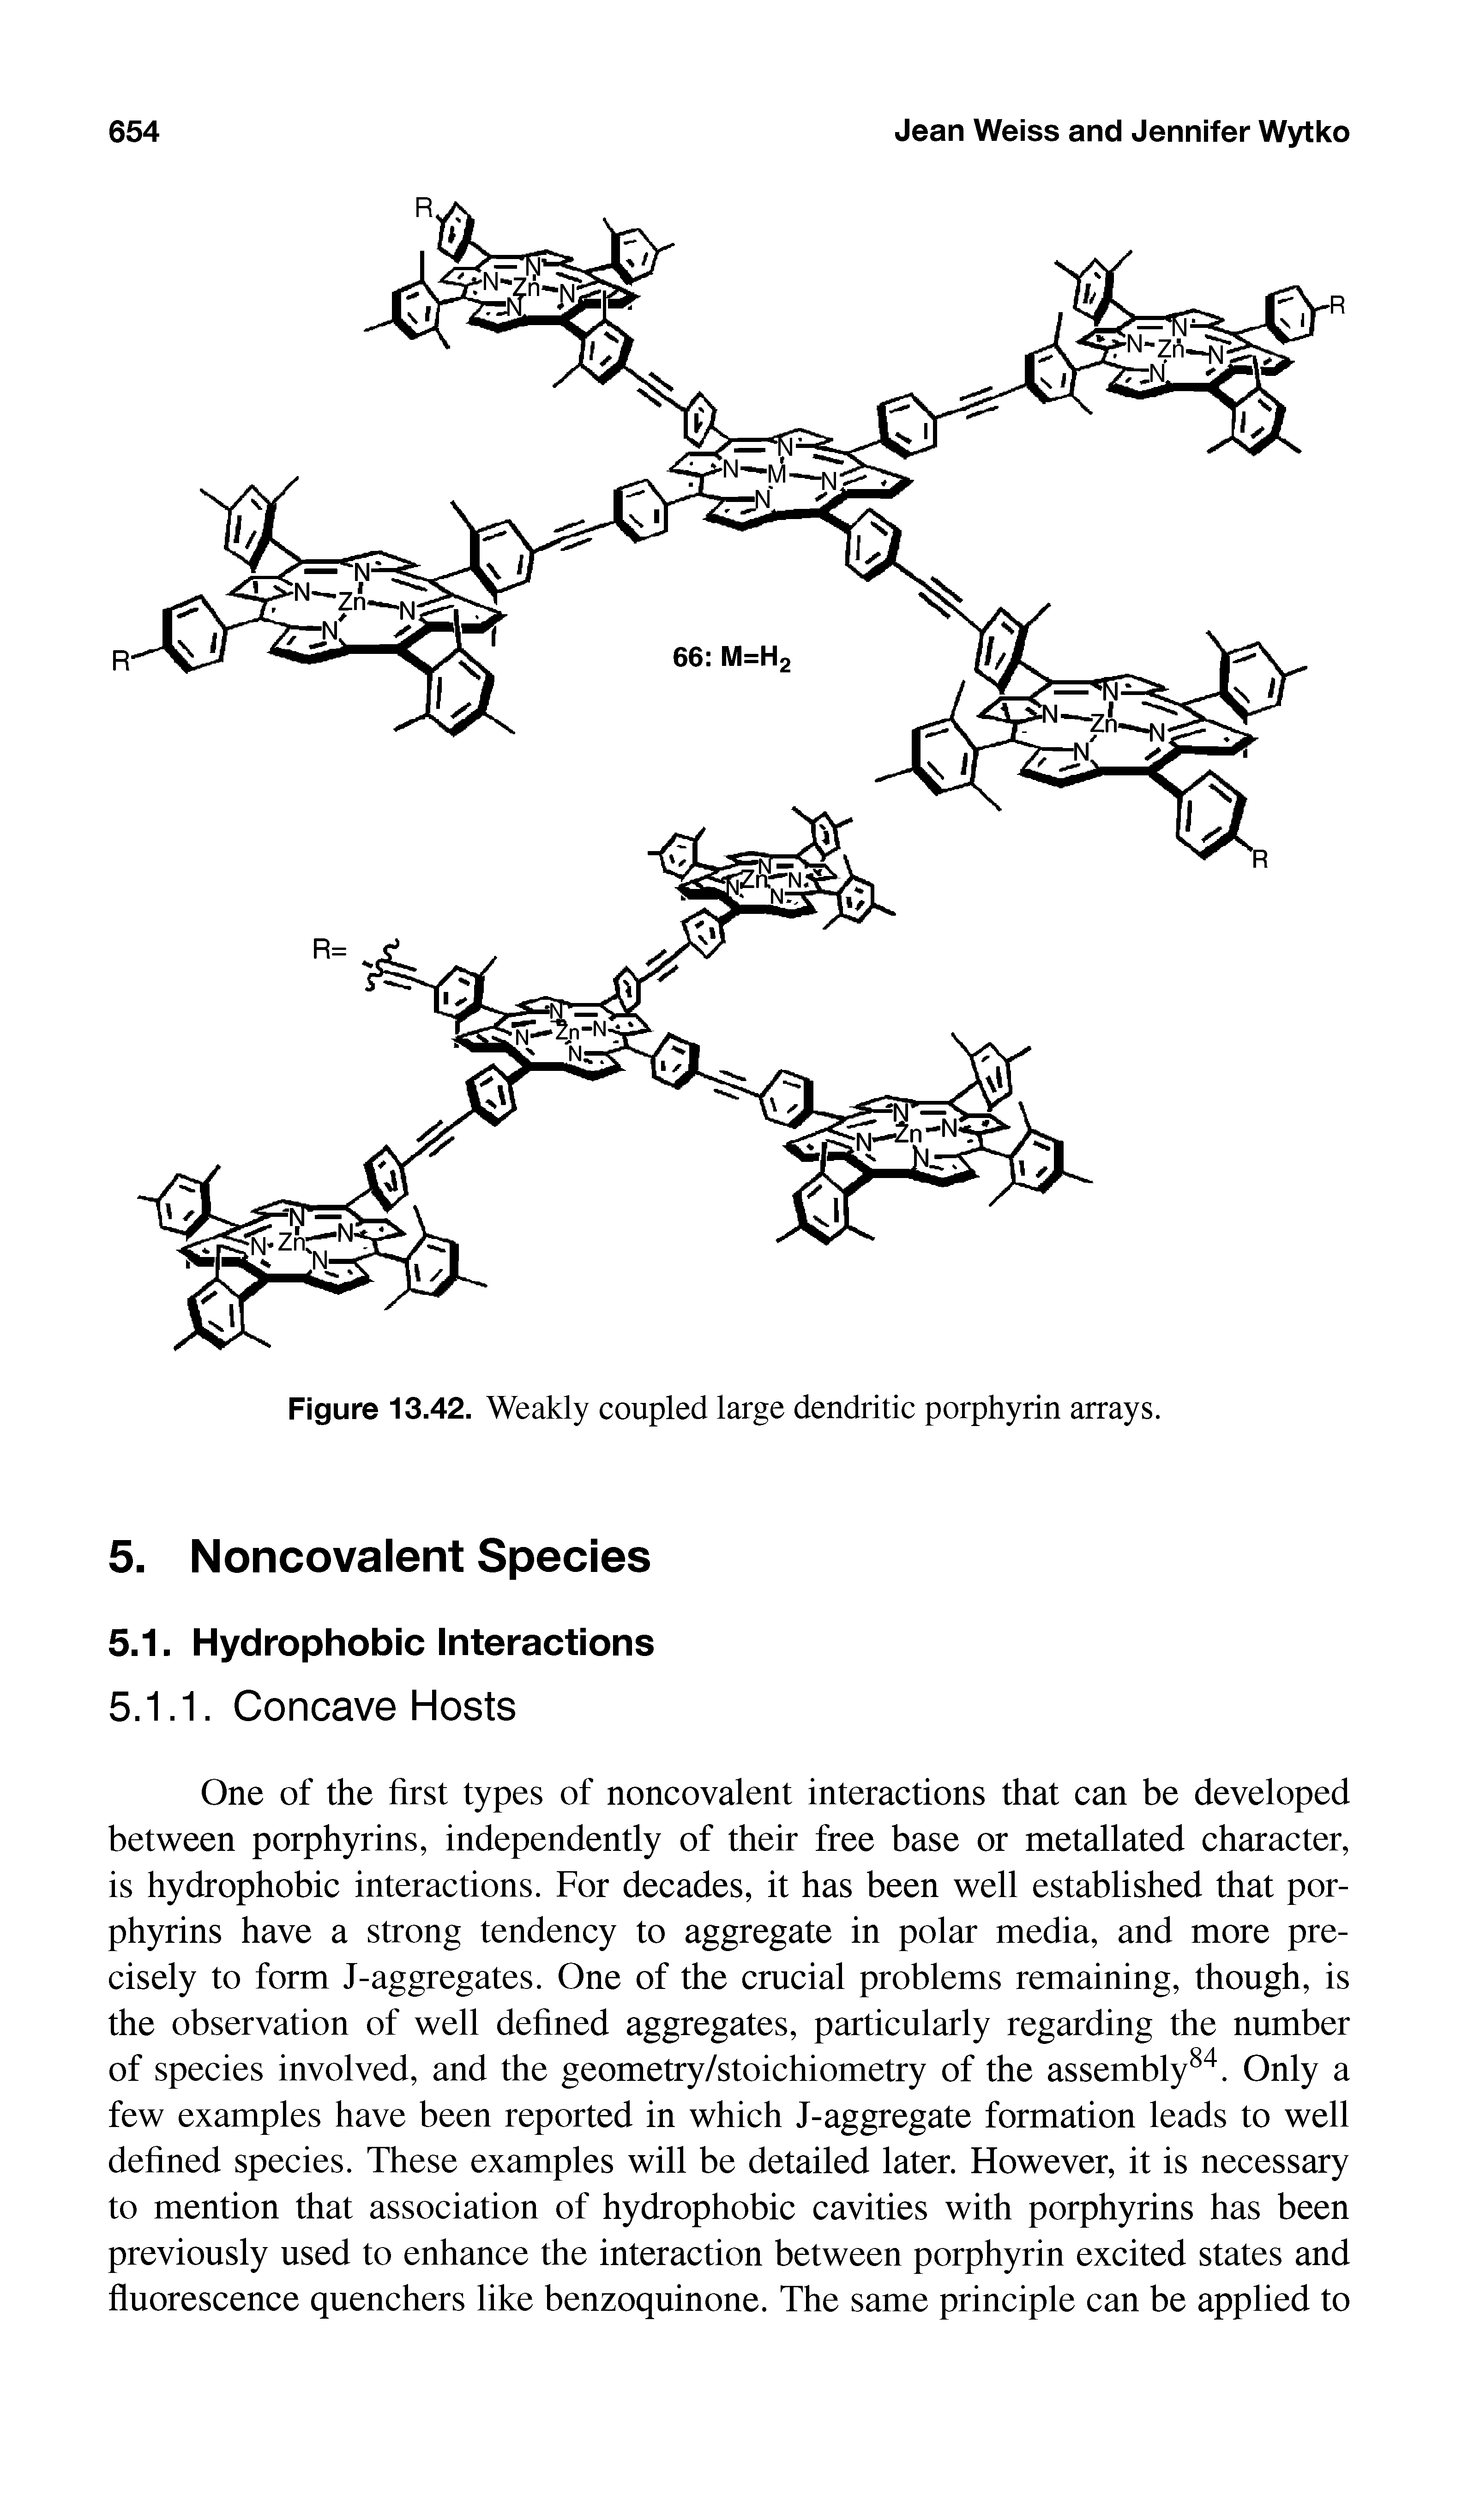 Figure 13.42. Weakly coupled large dendritic porphyrin arrays.